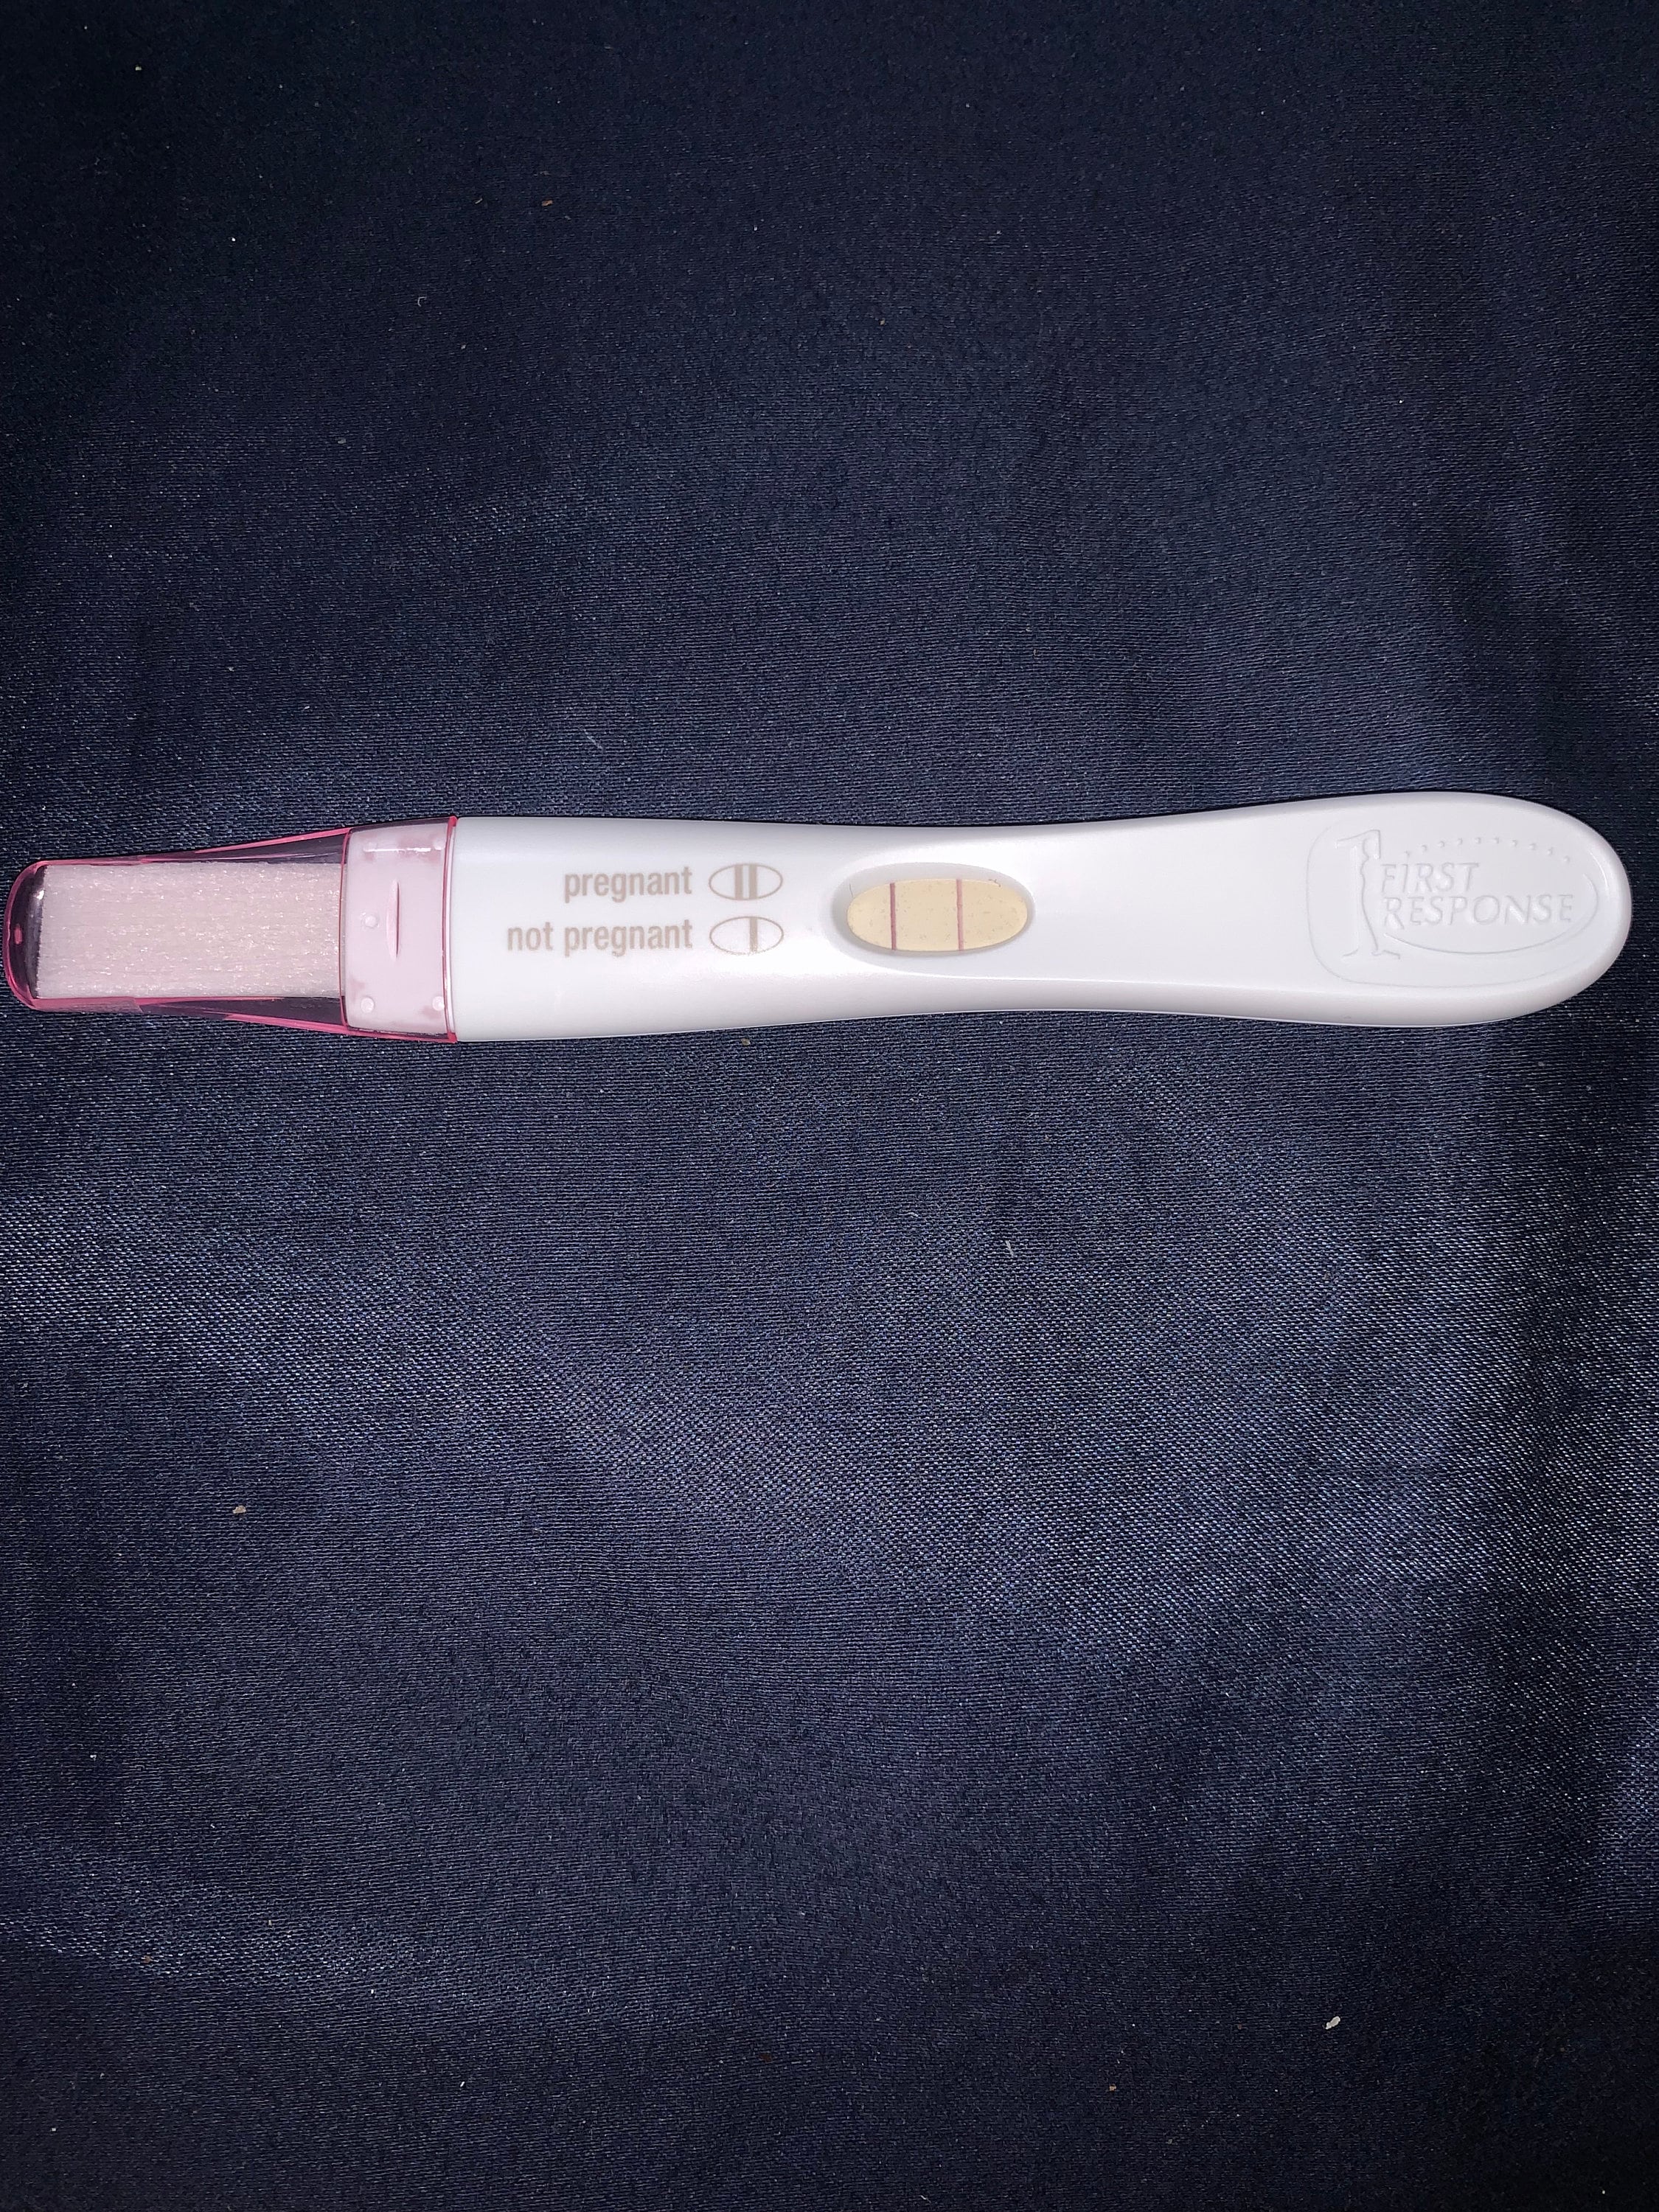 Positive First Response Pregnancy Tests 